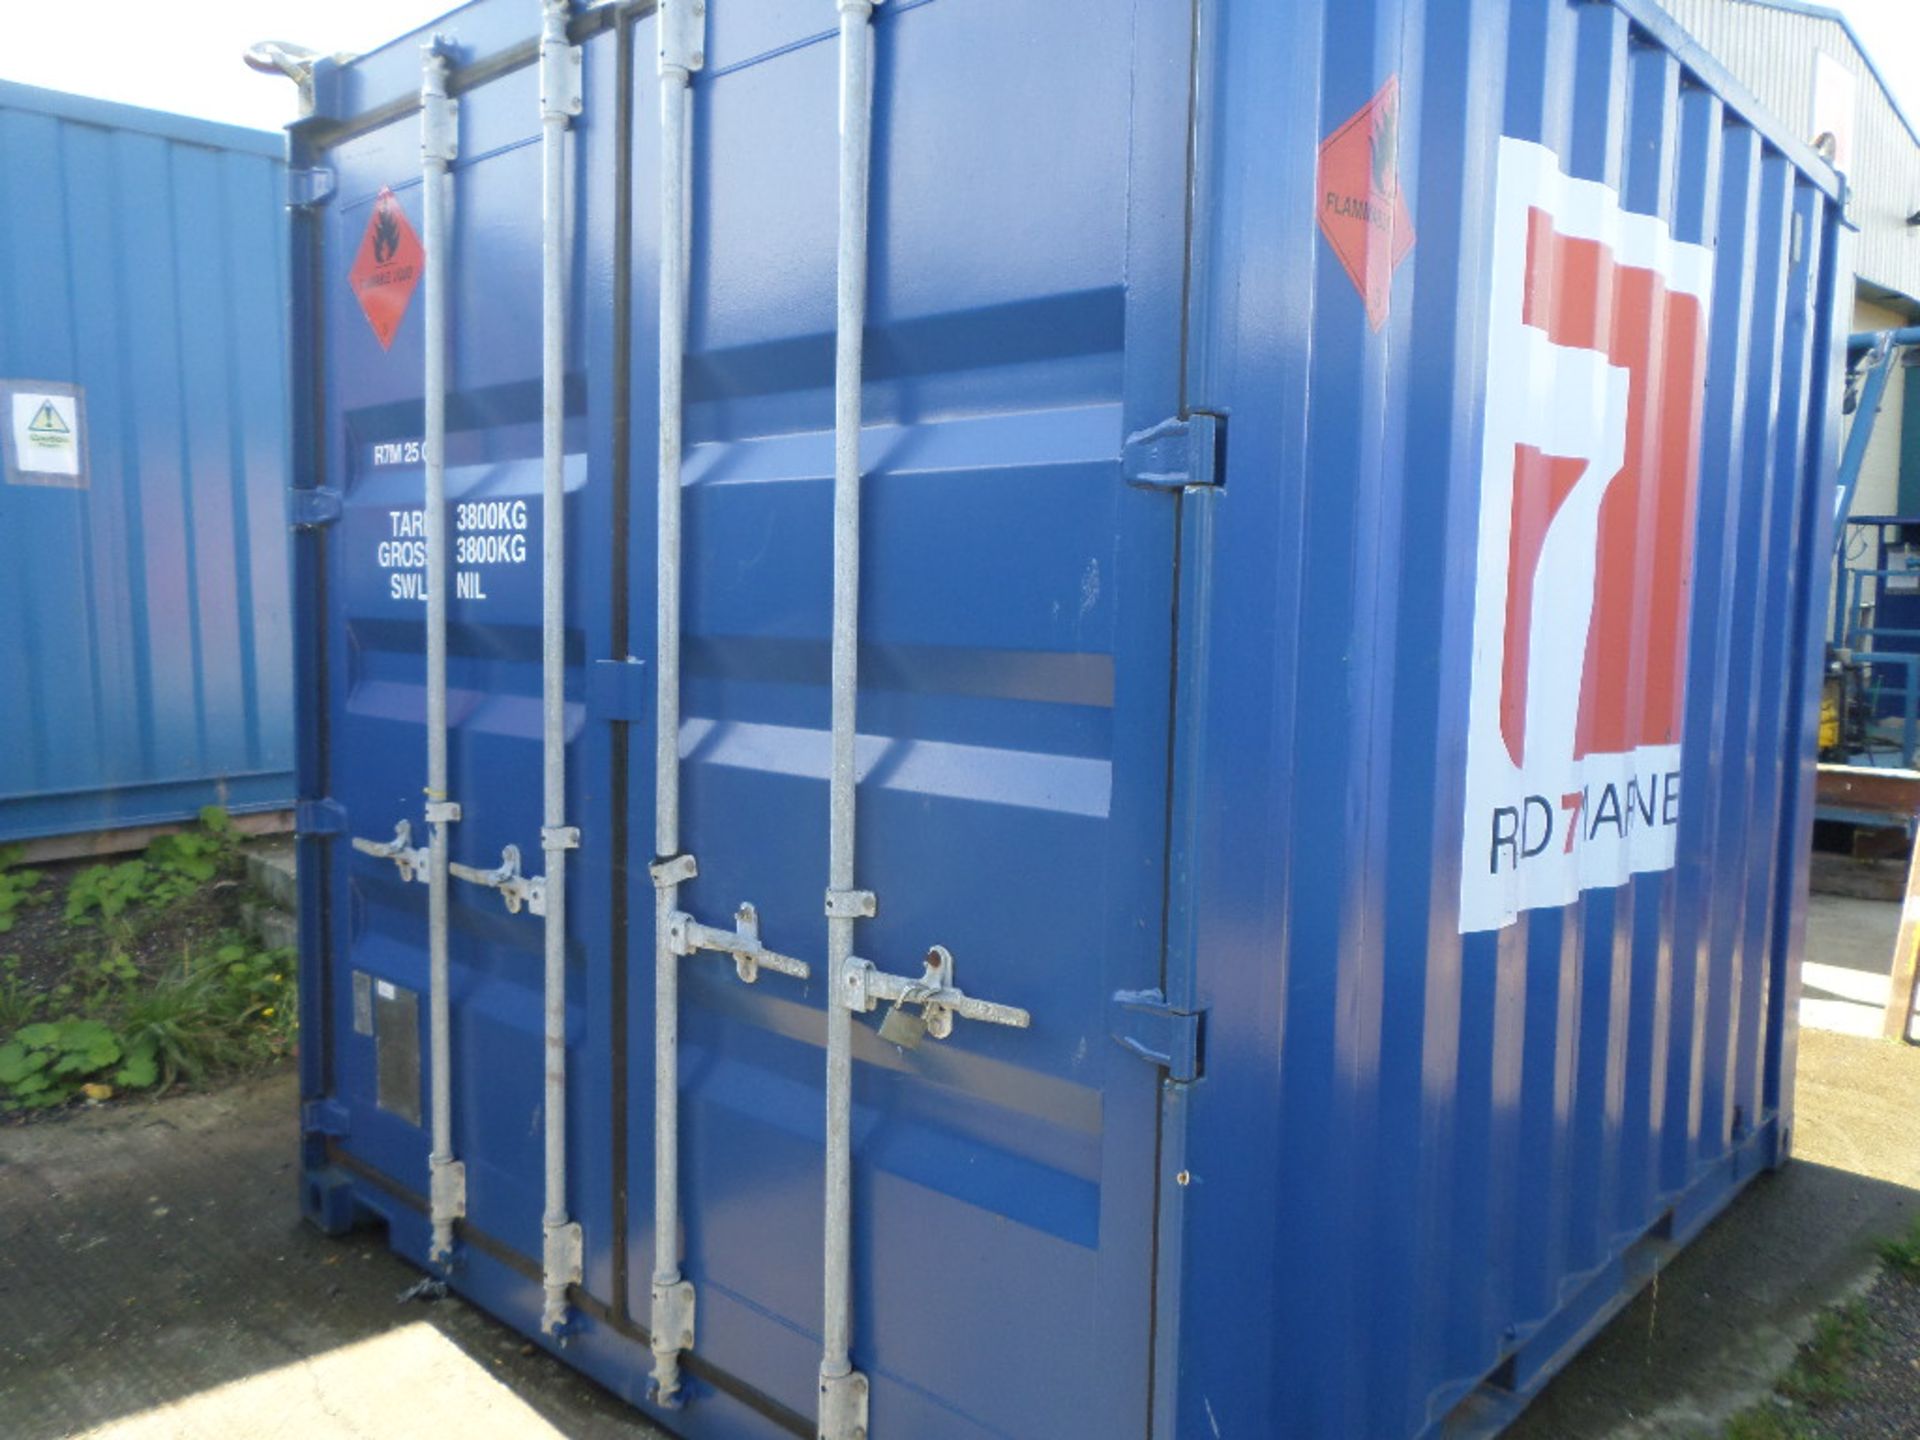 10ft x 8ft divers hot water supply container, IMCA compliant, reference No R7M 25 C  fitted with 2 x - Image 2 of 5